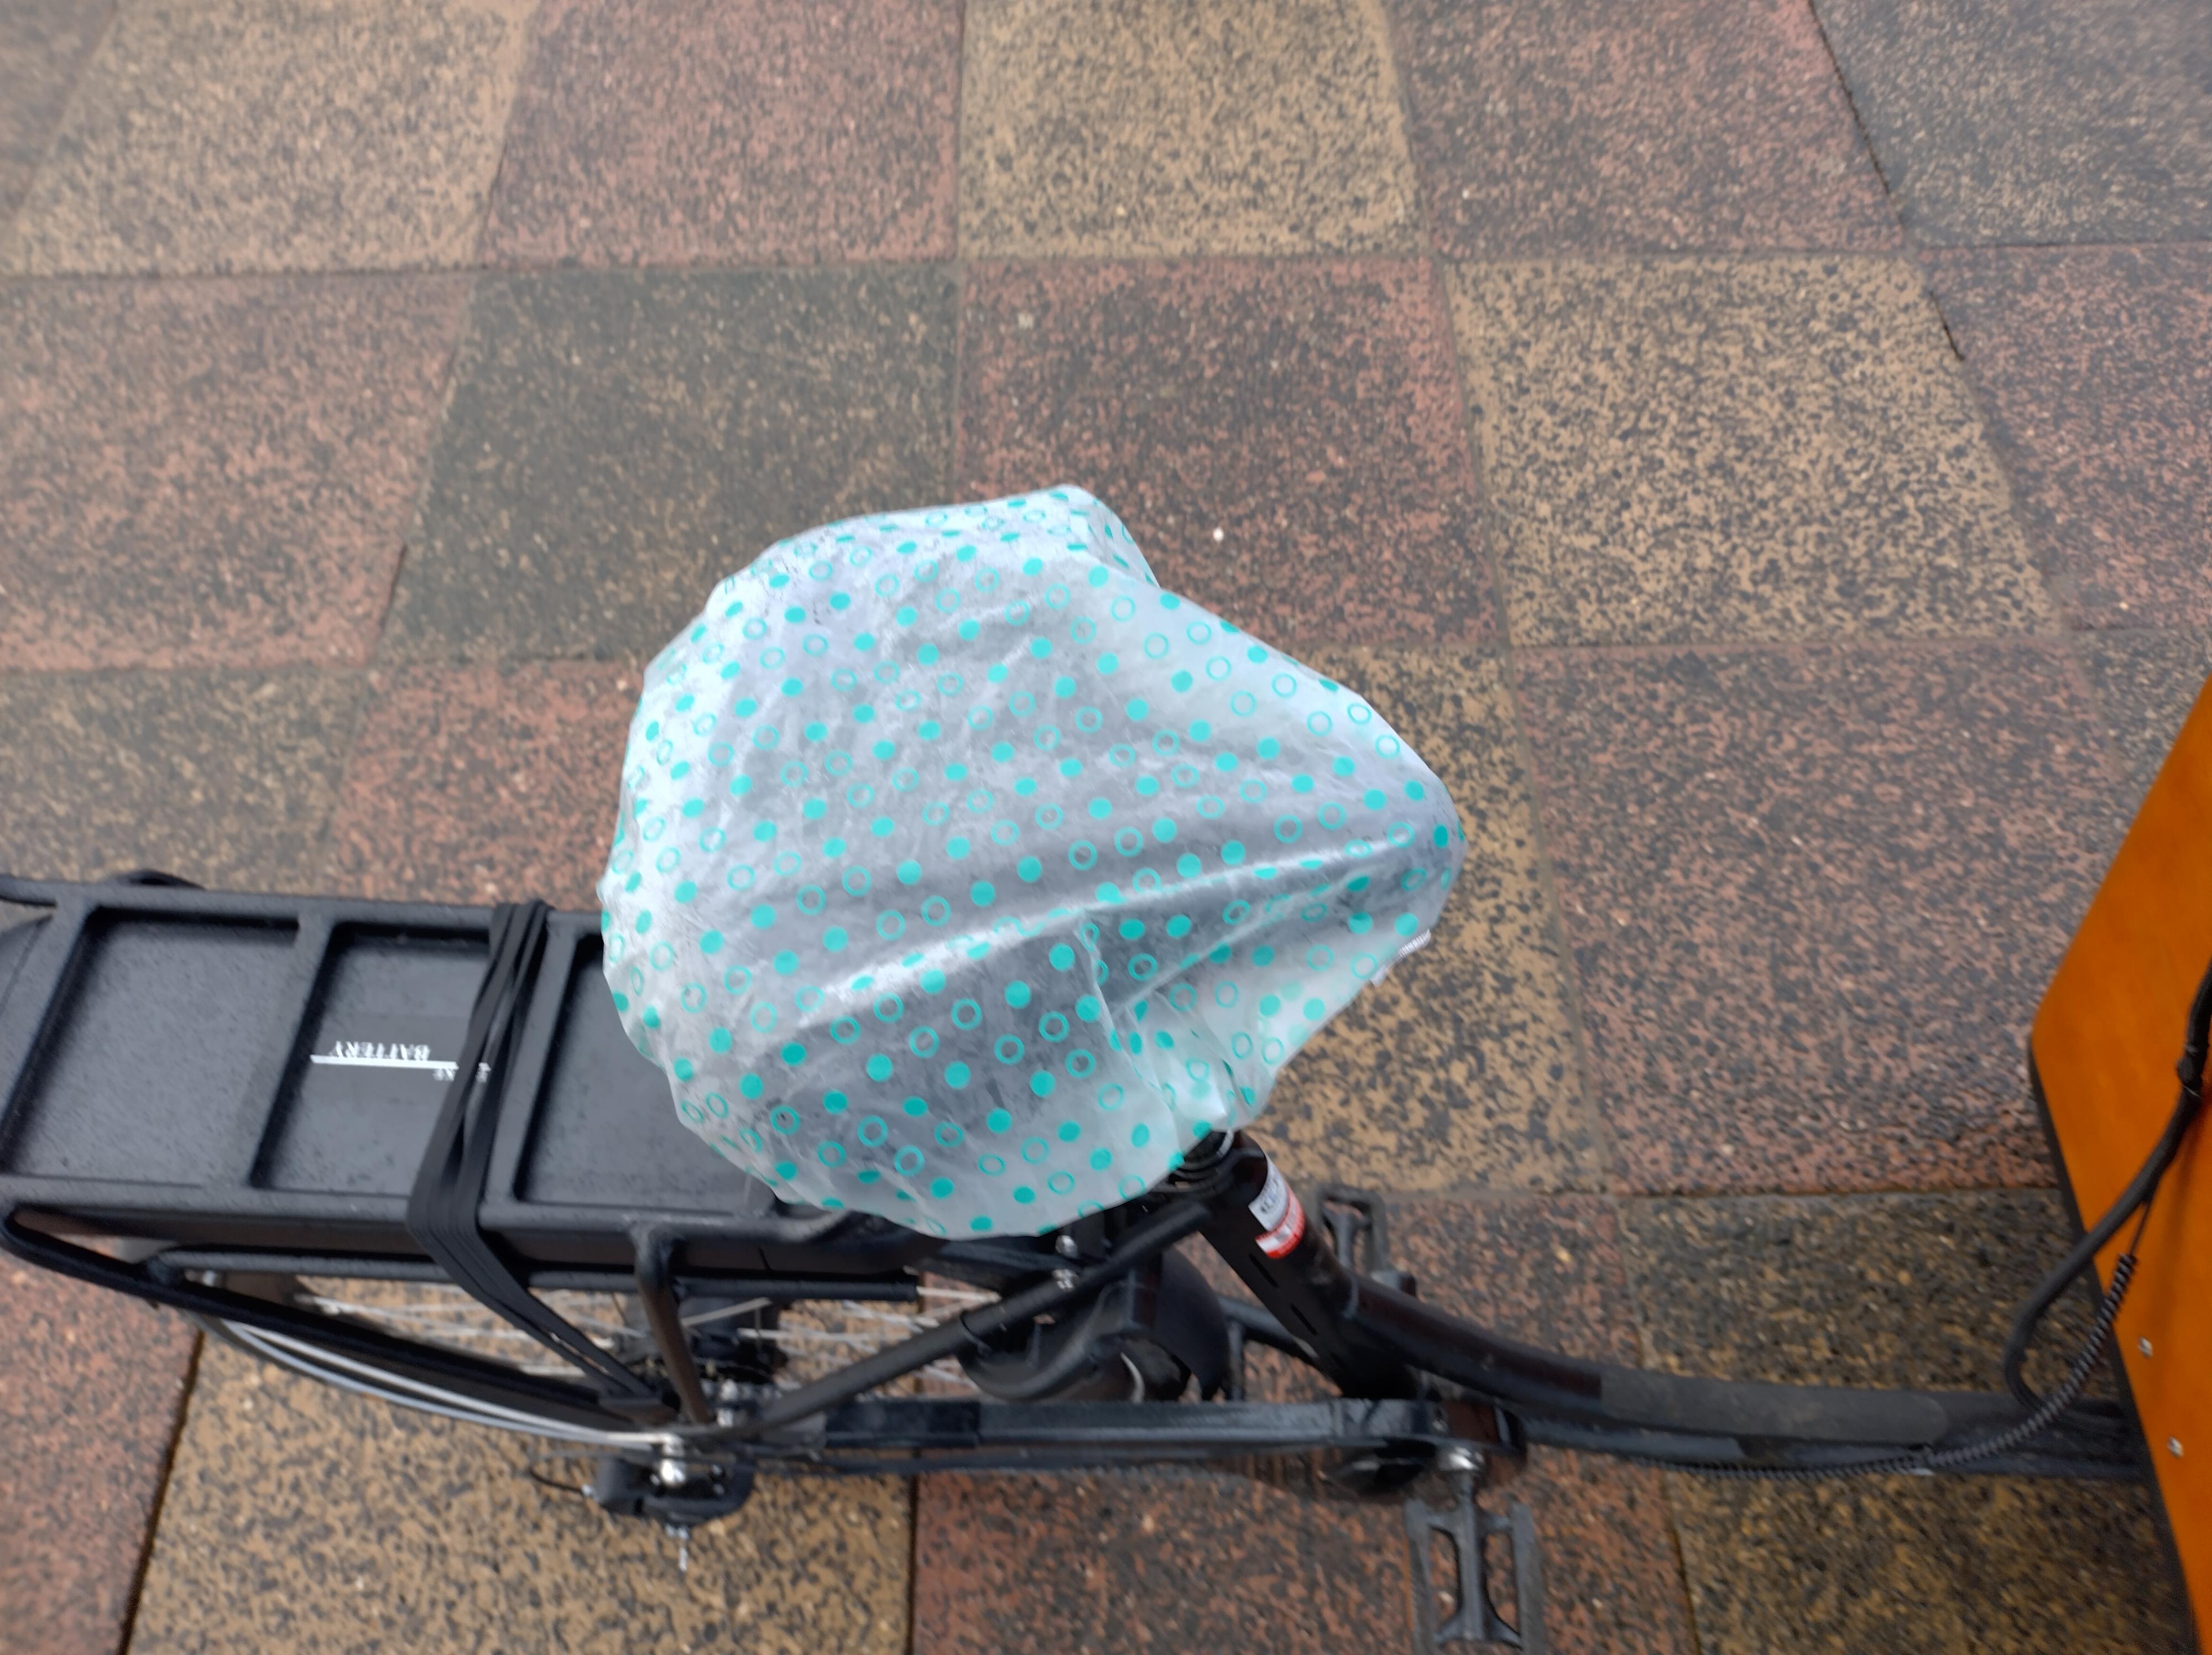 The rider's seat, covered with a shower cap.